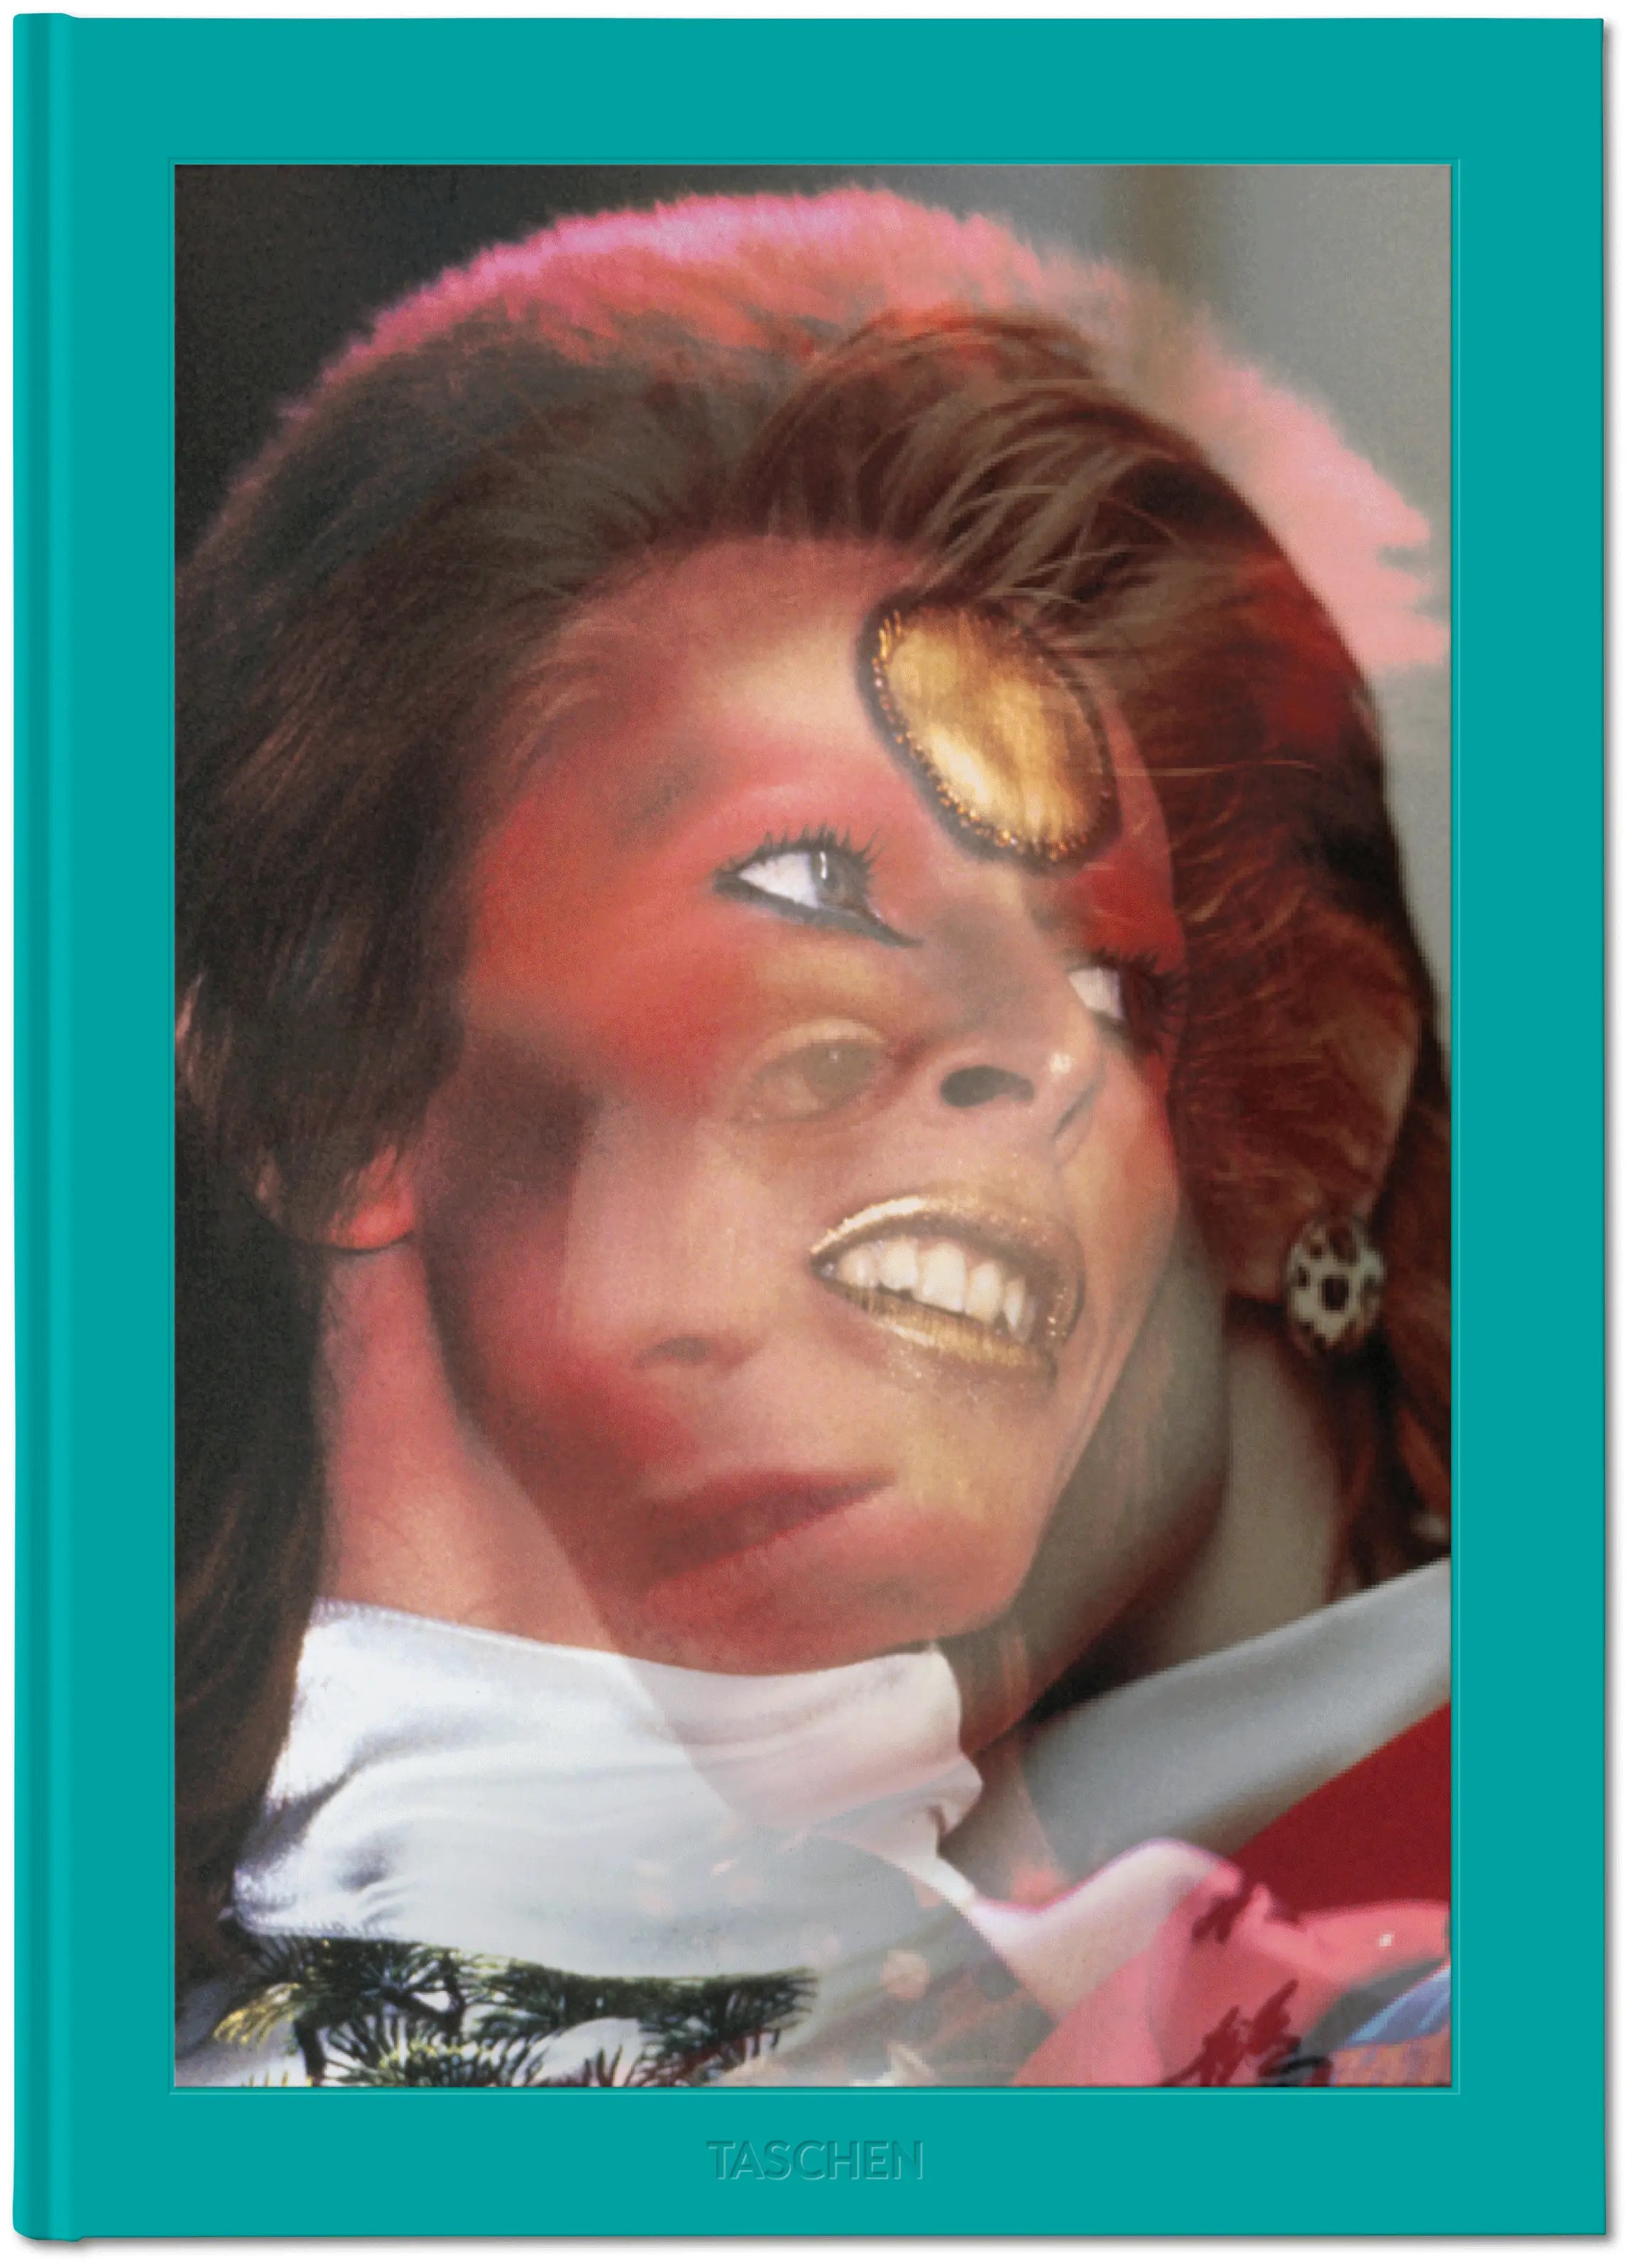 Mick Rock The Rise Of David Bowie 1972-1973